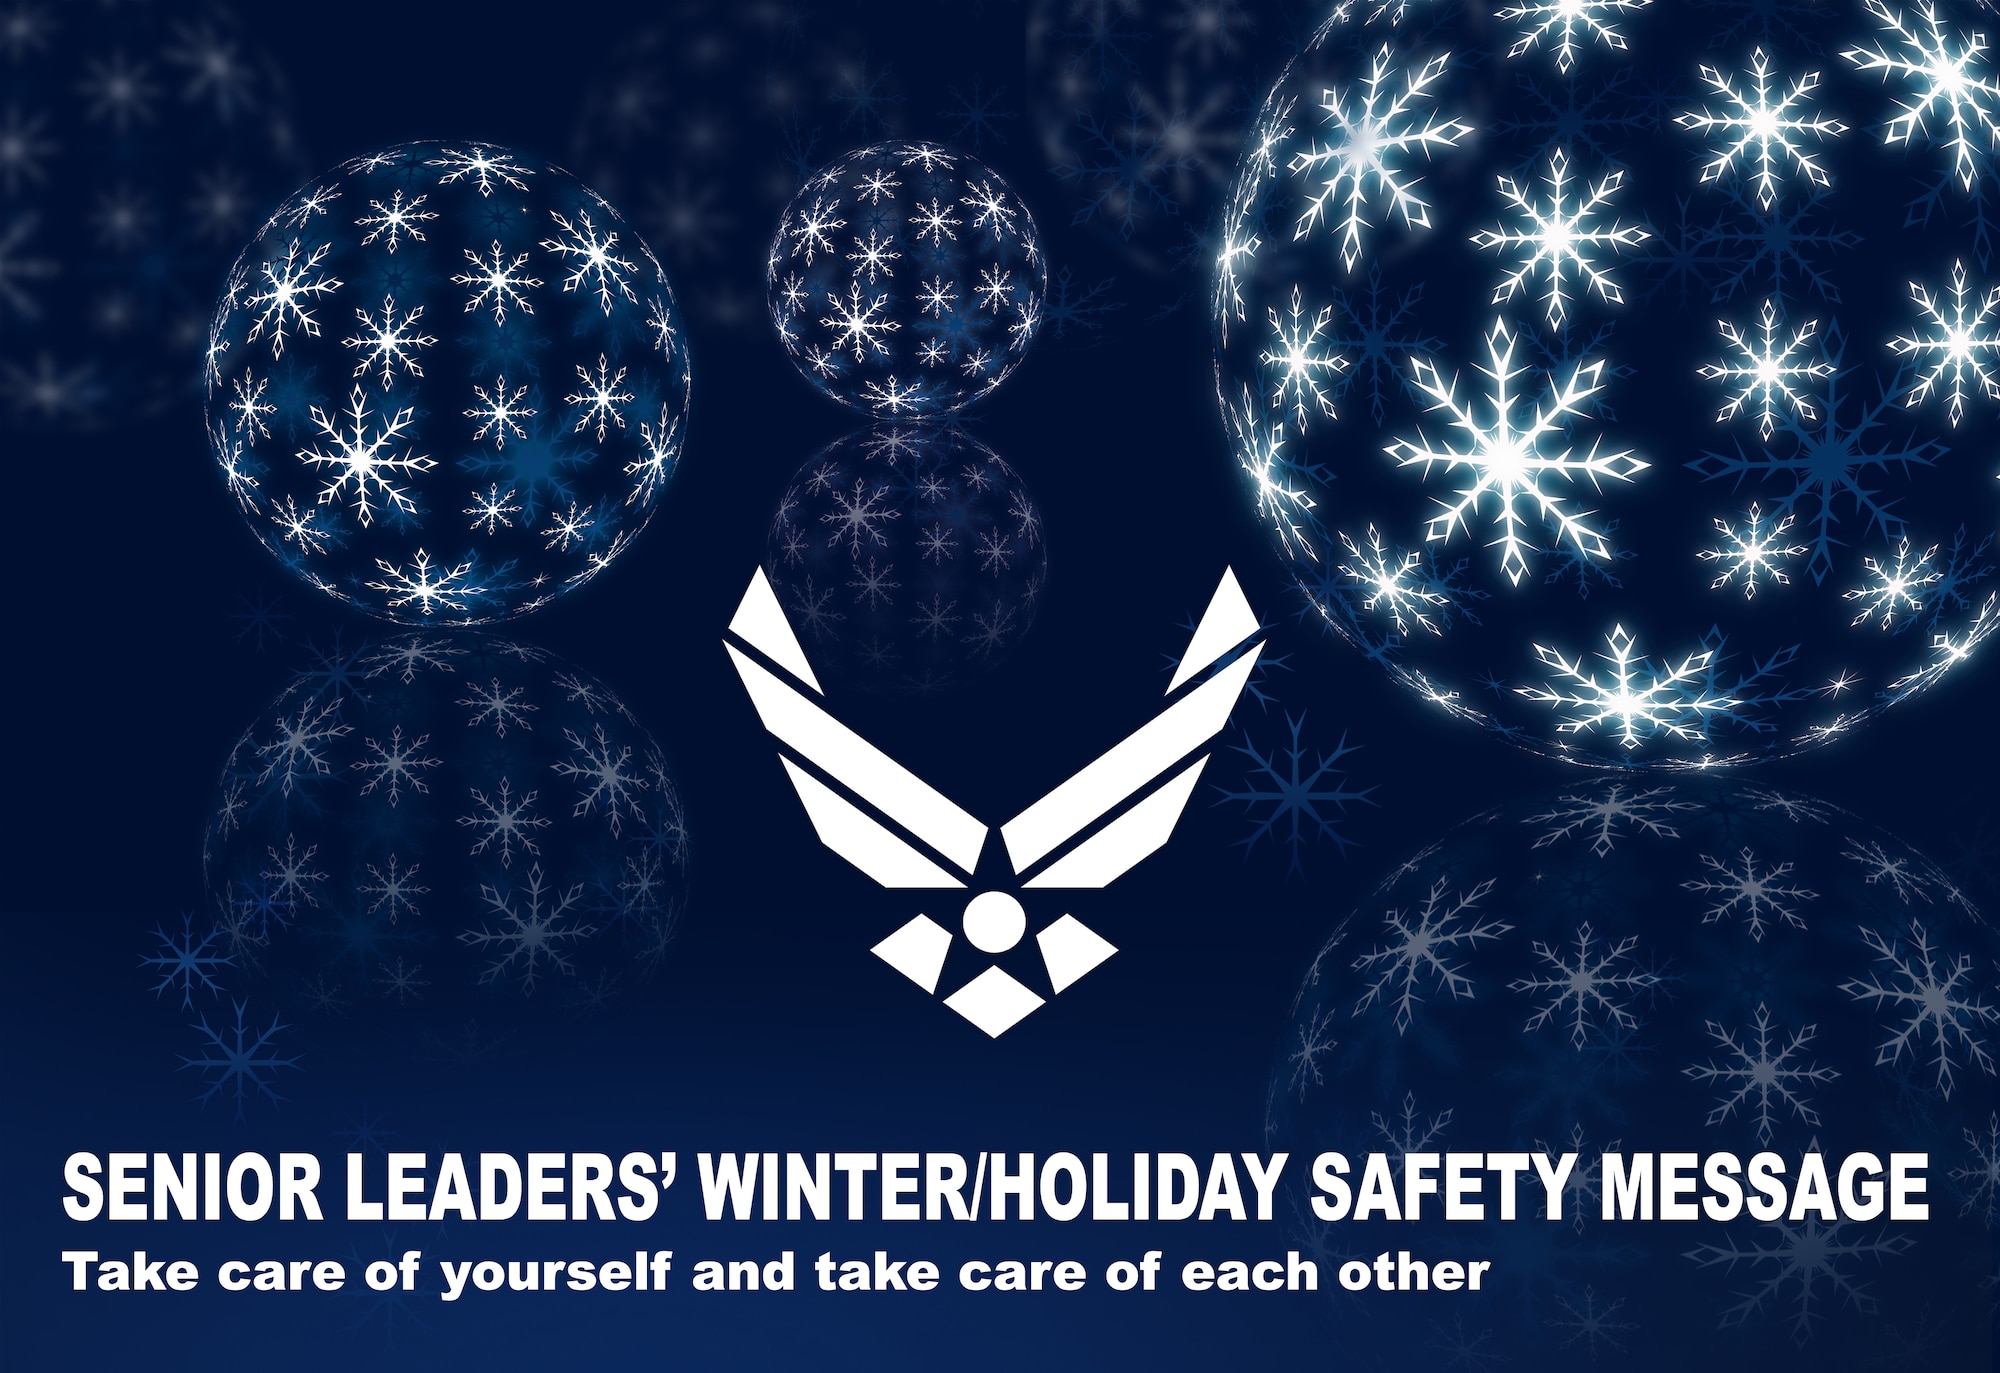 Secretary of the Air Force Deborah Lee James, Air Force Chief of Staff Gen. Mark A. Welsh III and Chief Master Sgt. of the Air Force James A. Cody send a holiday safety message to highlight the importance of taking care of yourself and taking care of each other during this winter/holiday season. (Air Force graphic by Keith Wright)